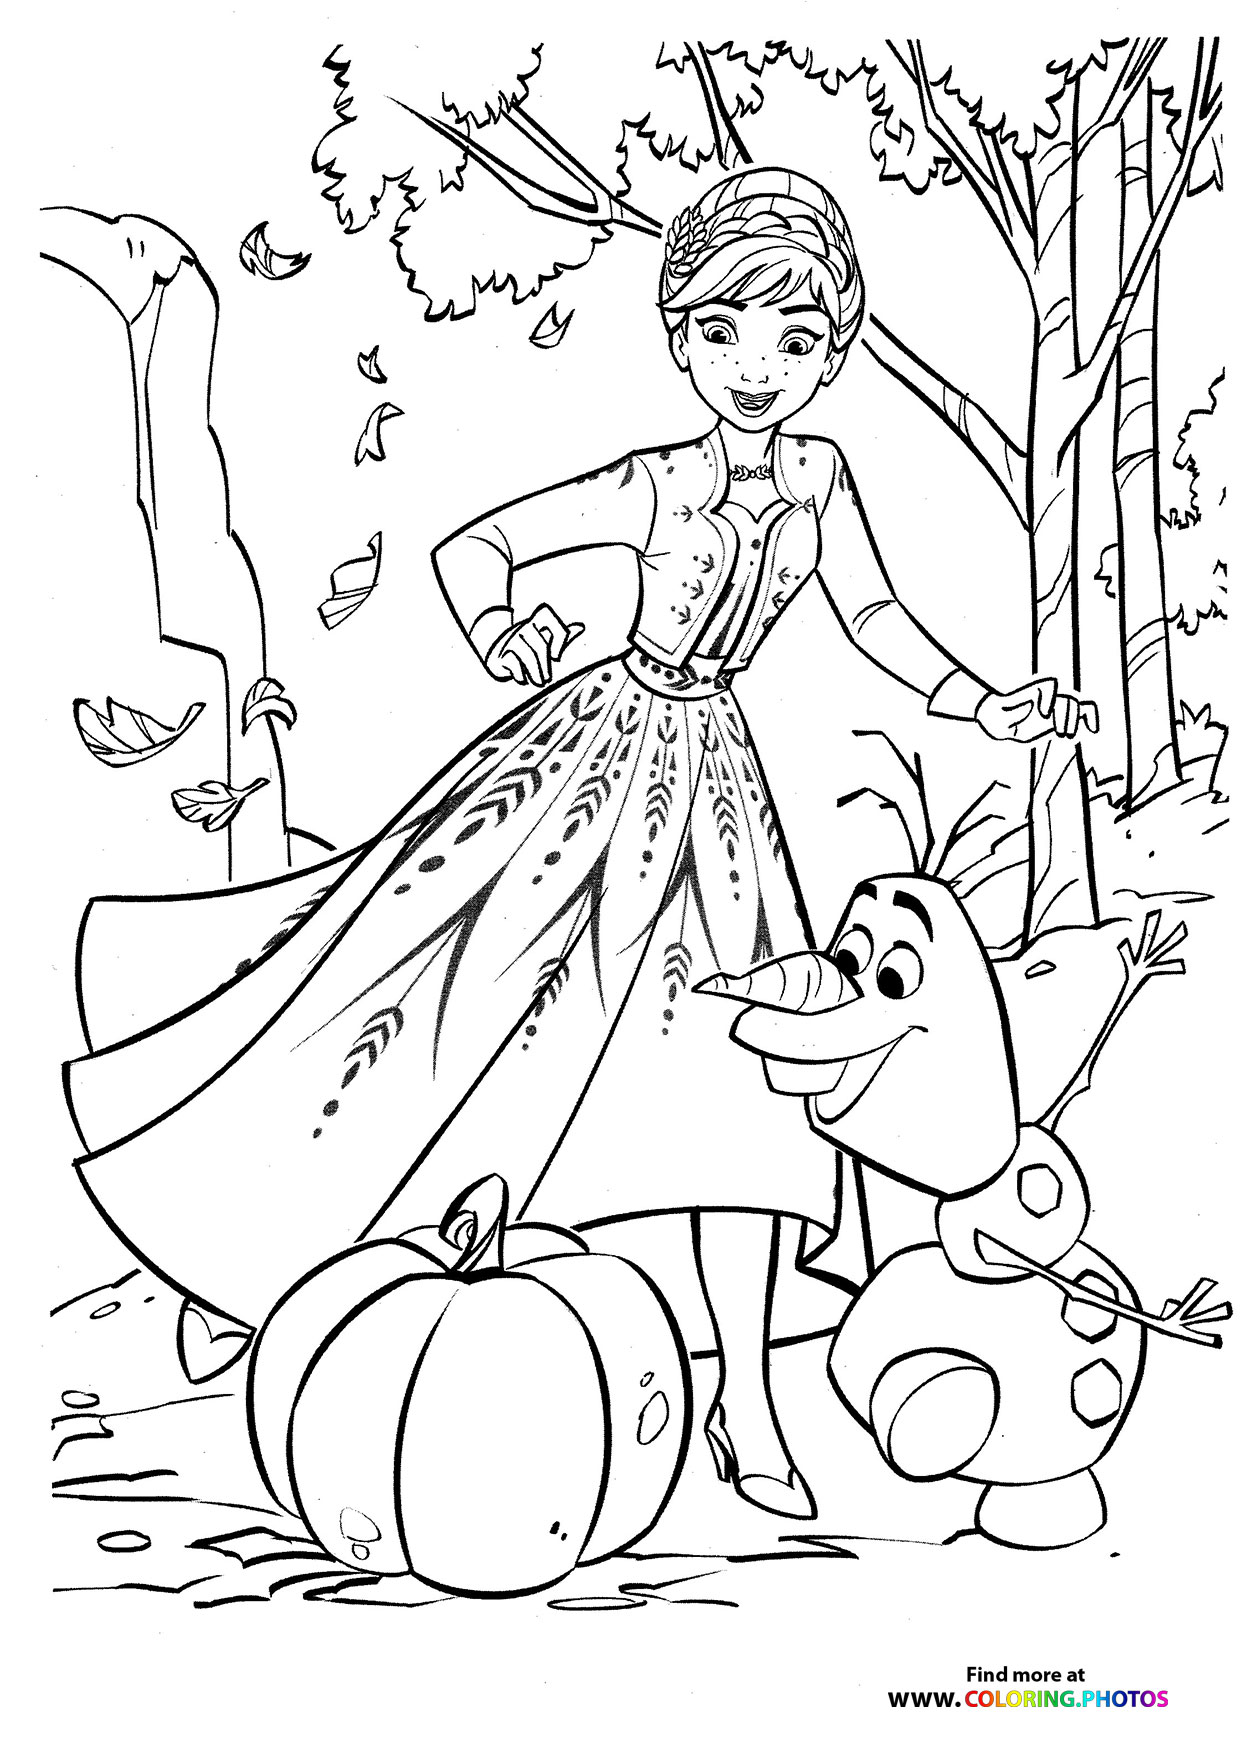 140 Olaf Coloring Pages: Frozen Fun for Everyone 14